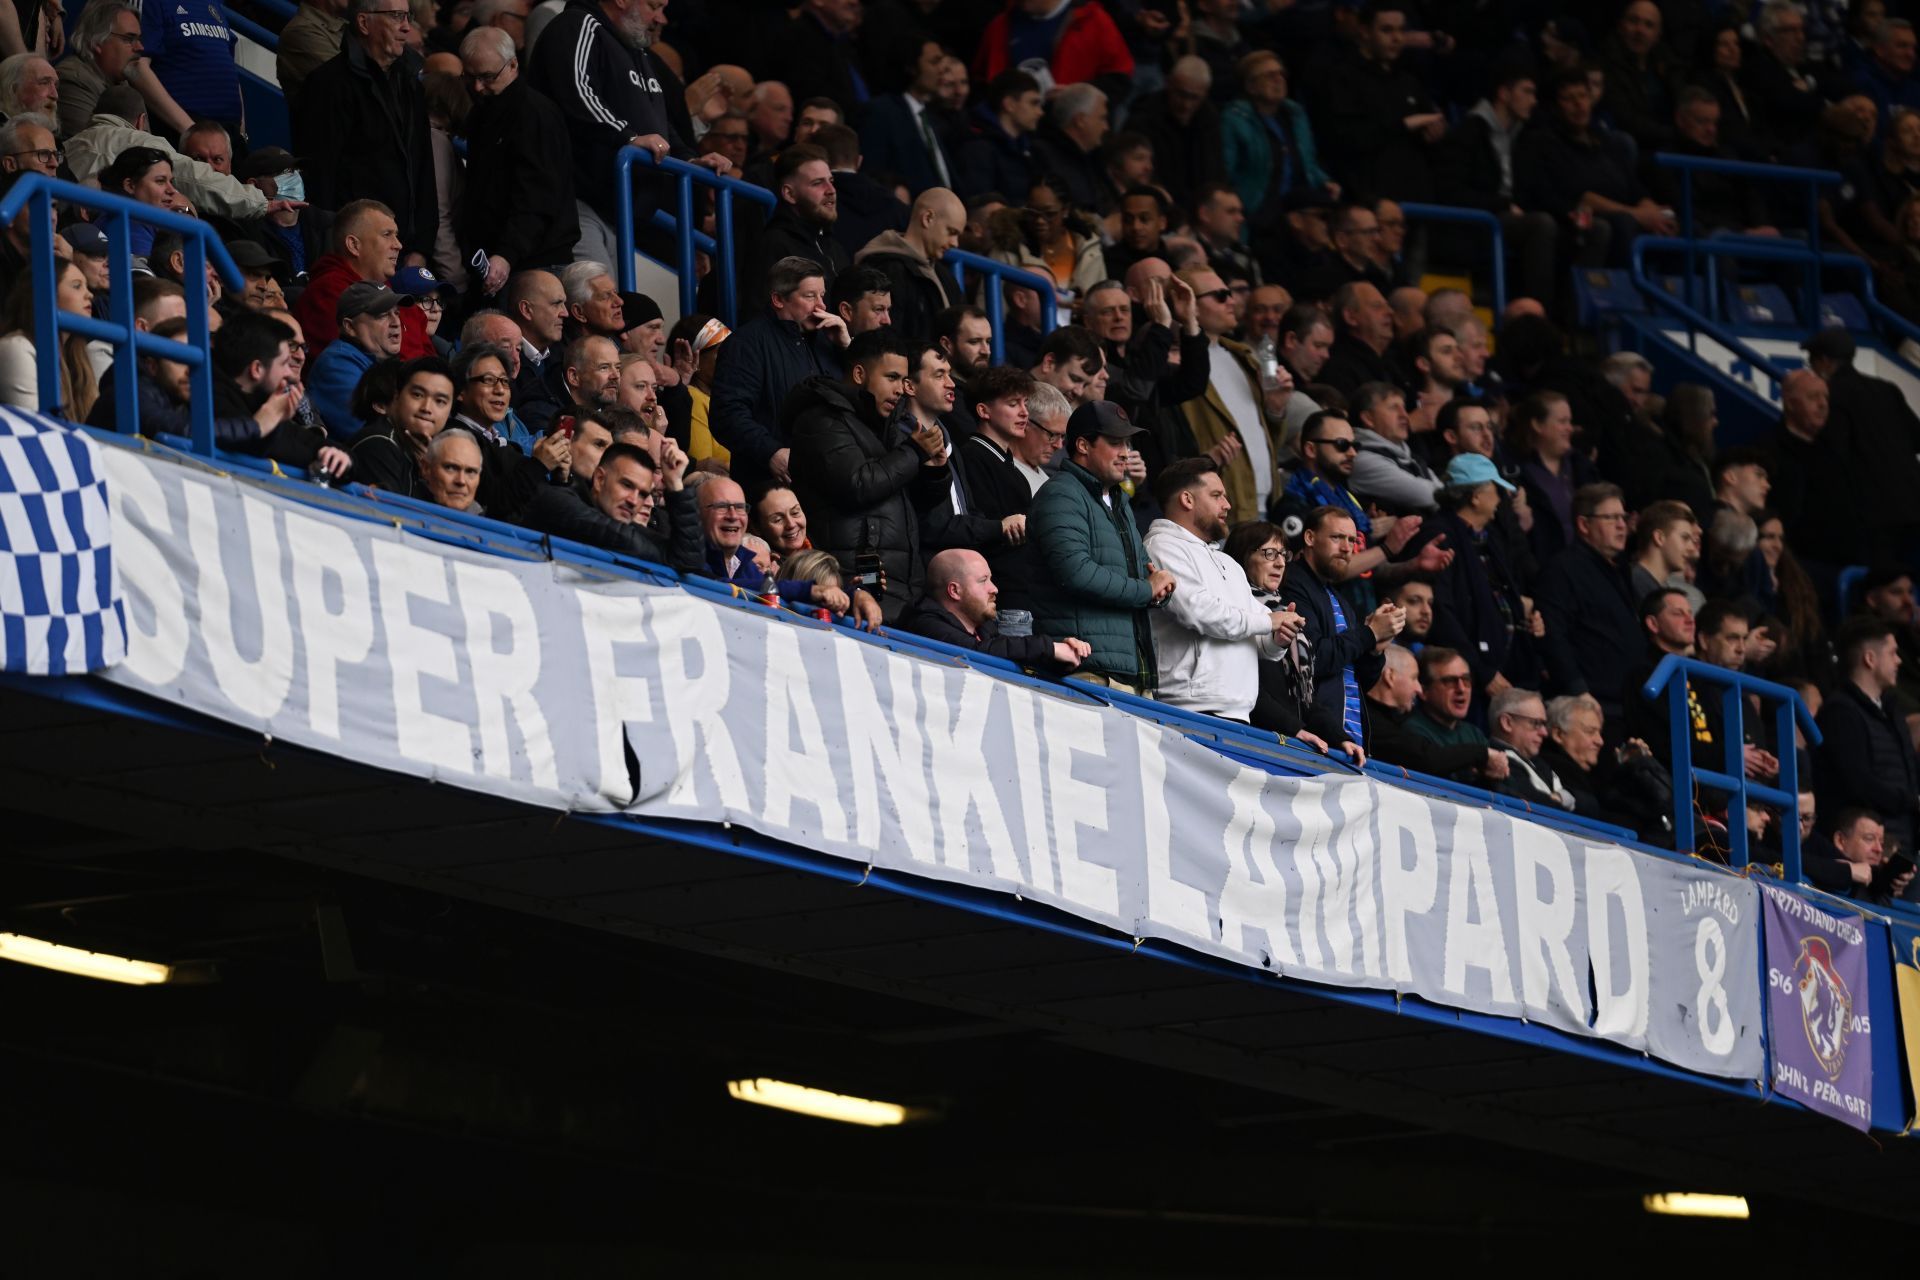 Lampard is still revered by Chelsea supporters.